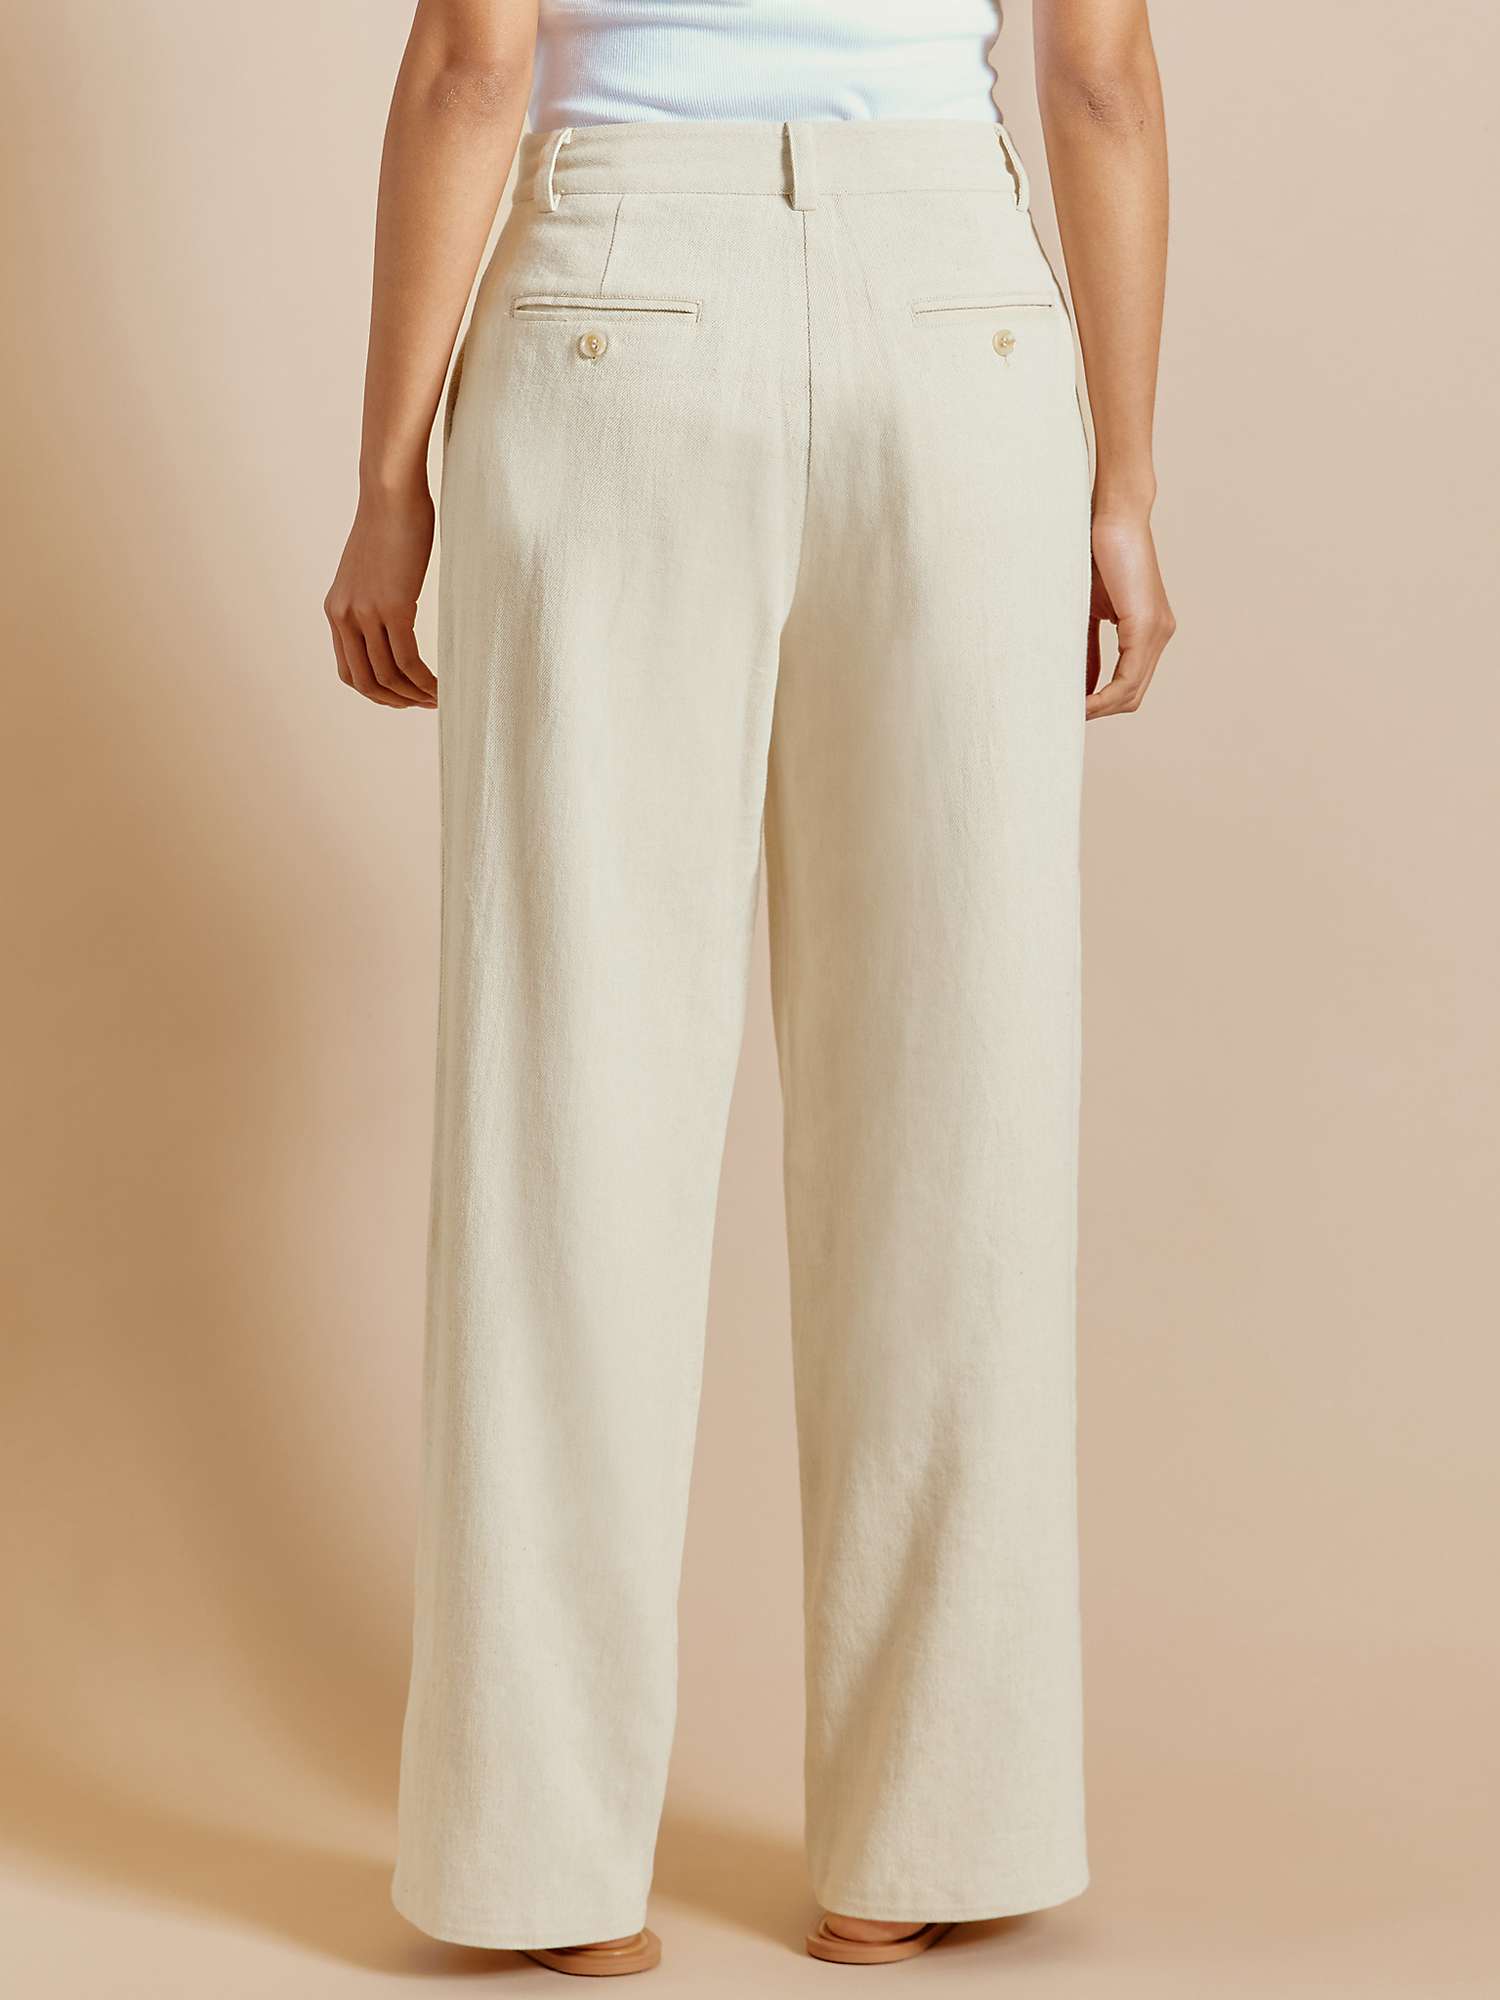 Buy Albaray Cotton Linen Blend Twill Trousers, Sand Online at johnlewis.com